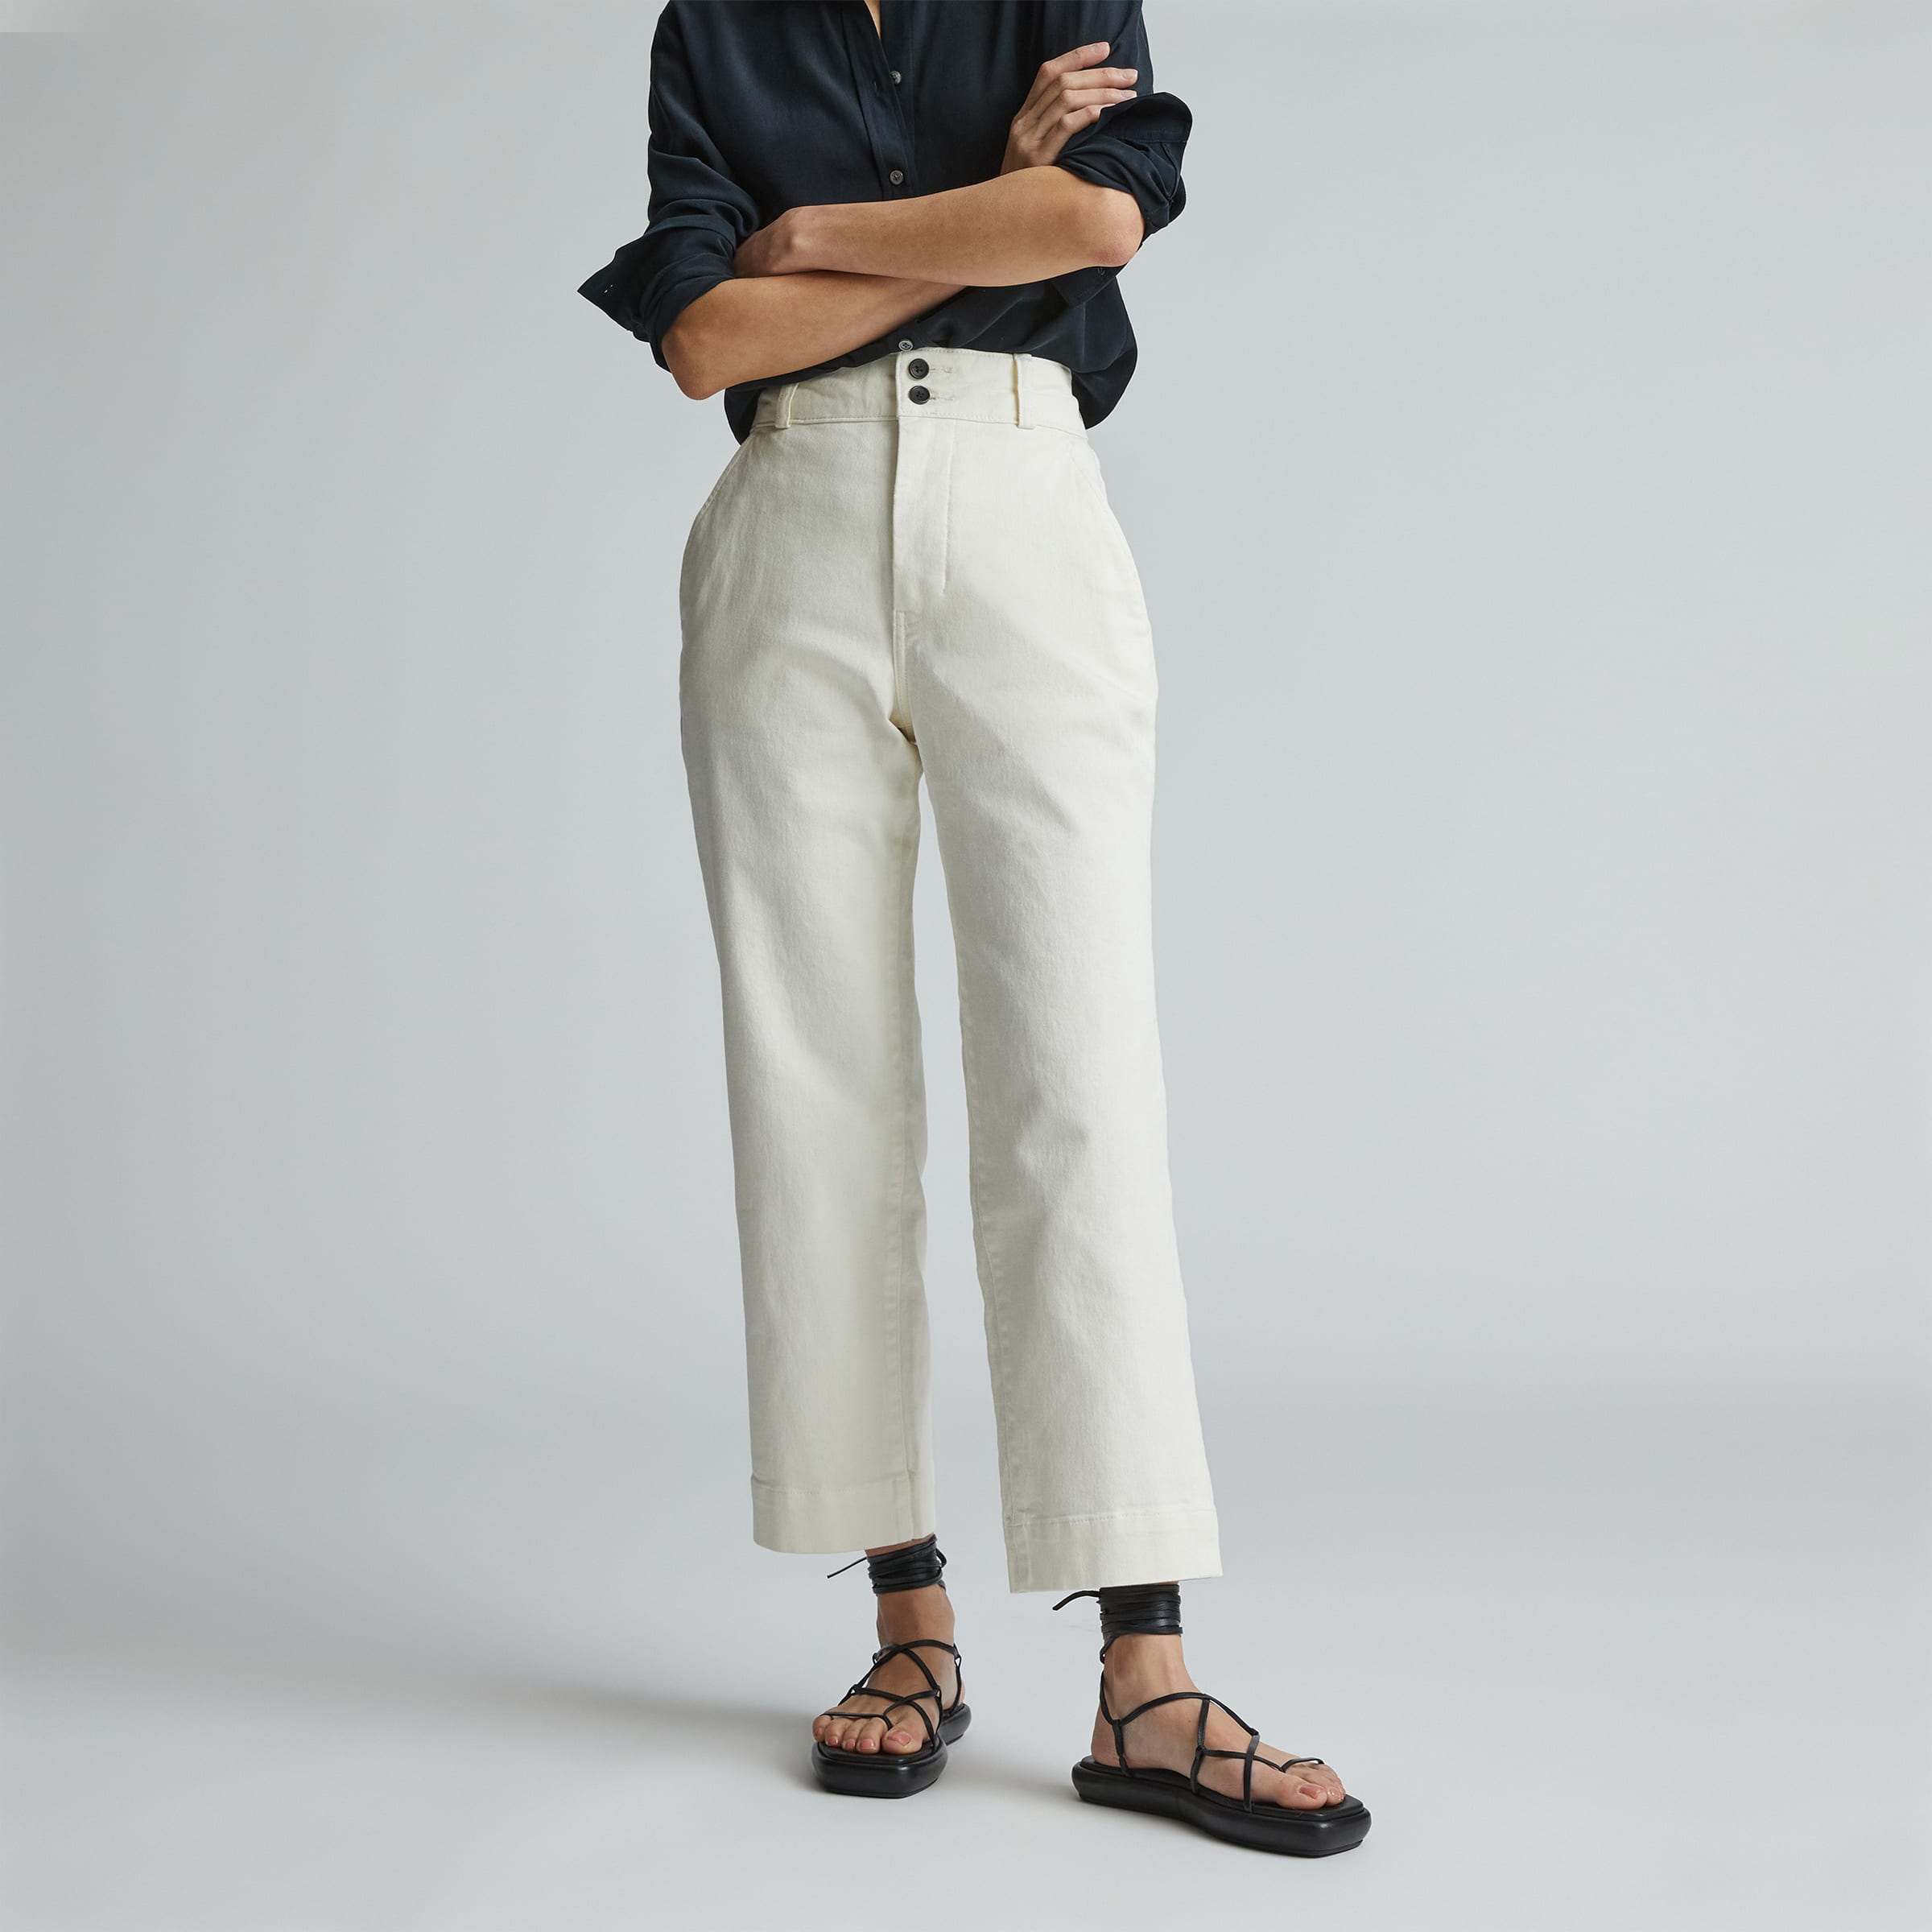 Everlane The Wide Leg Structure Pant White Size 2 NWOT